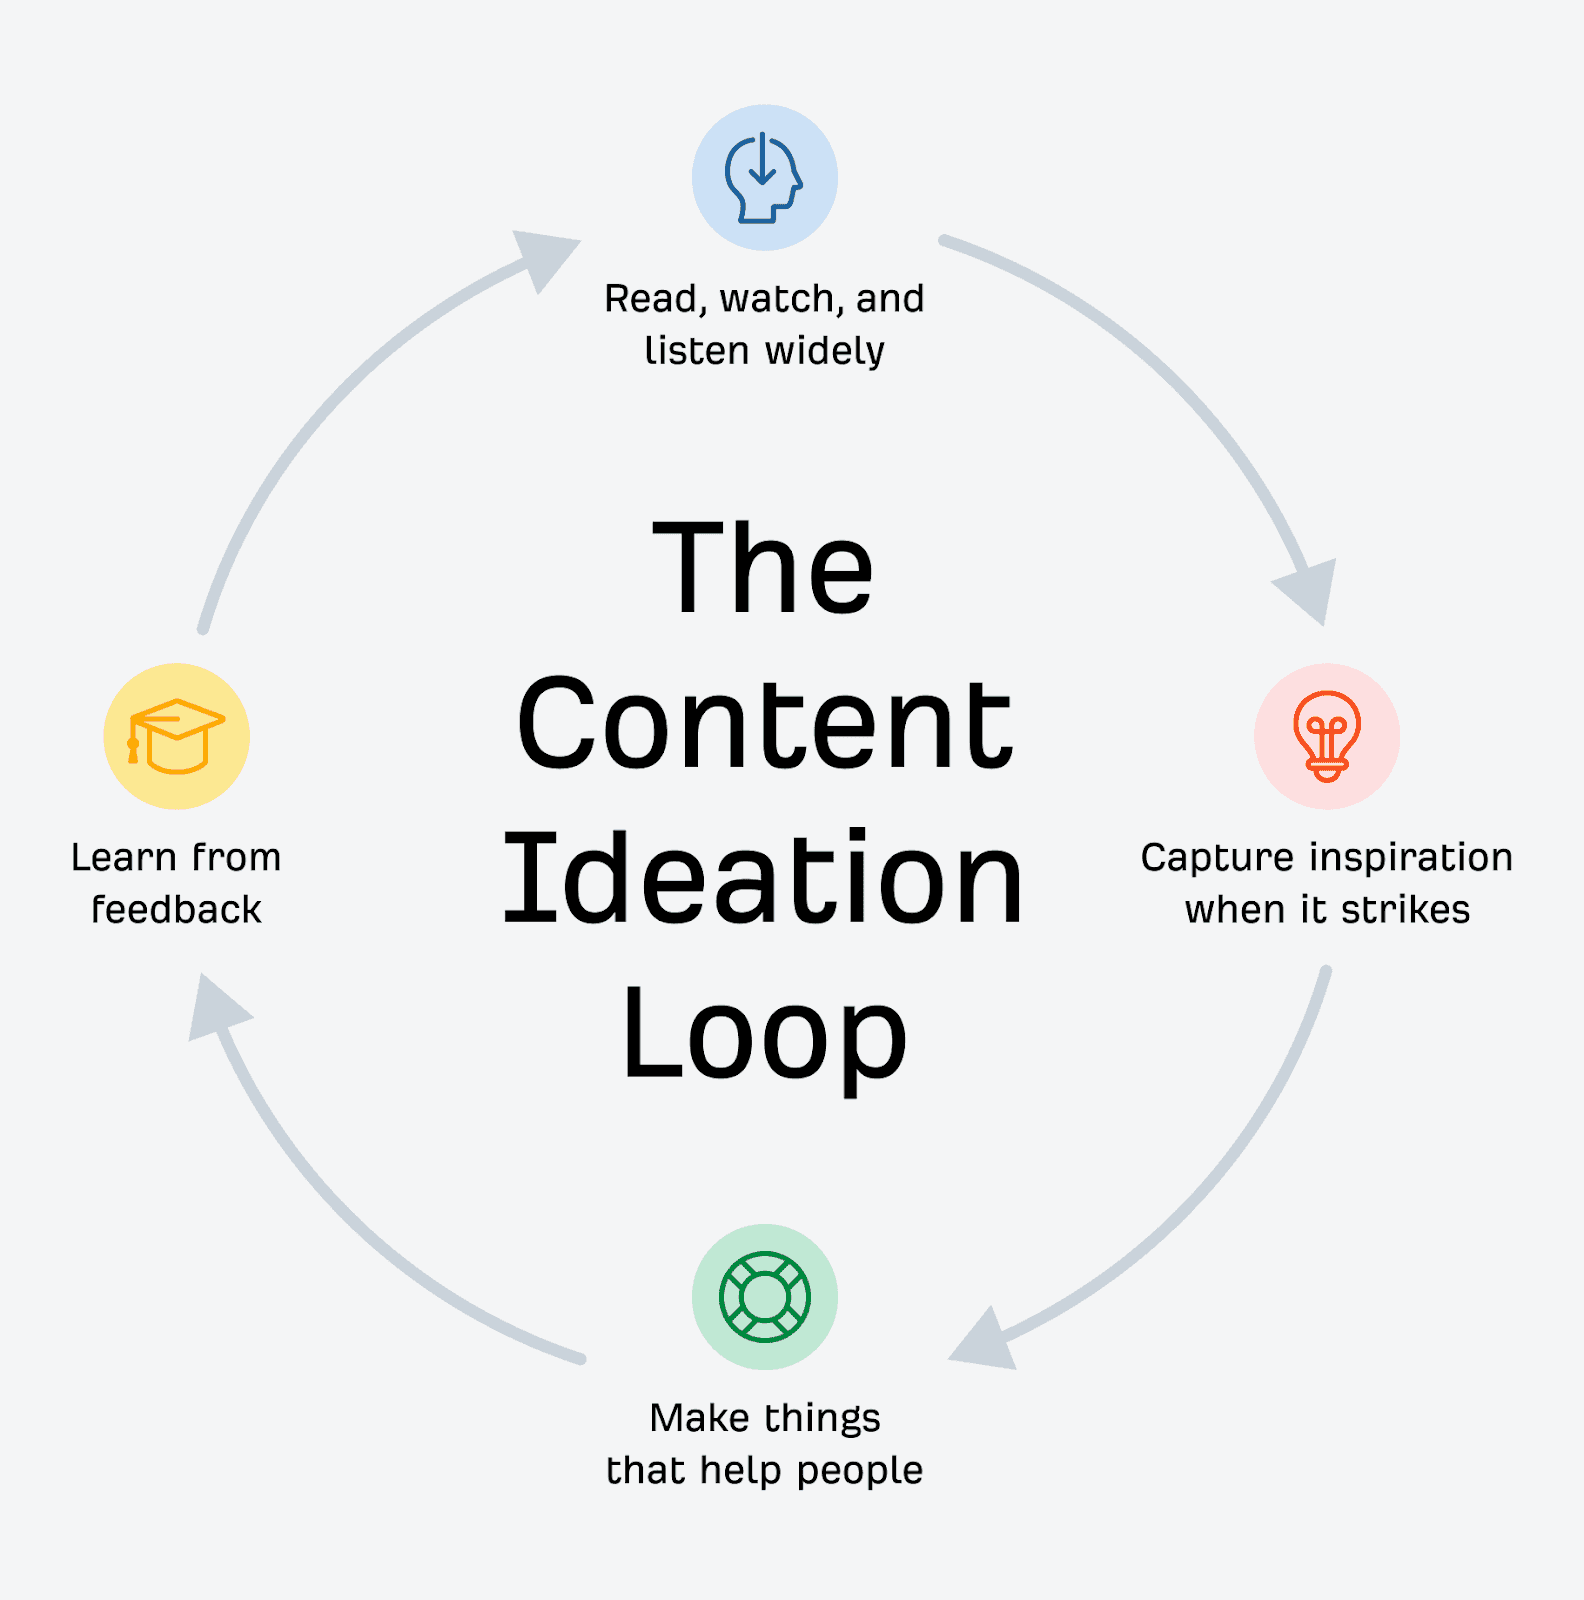 The Content Ideation Loop